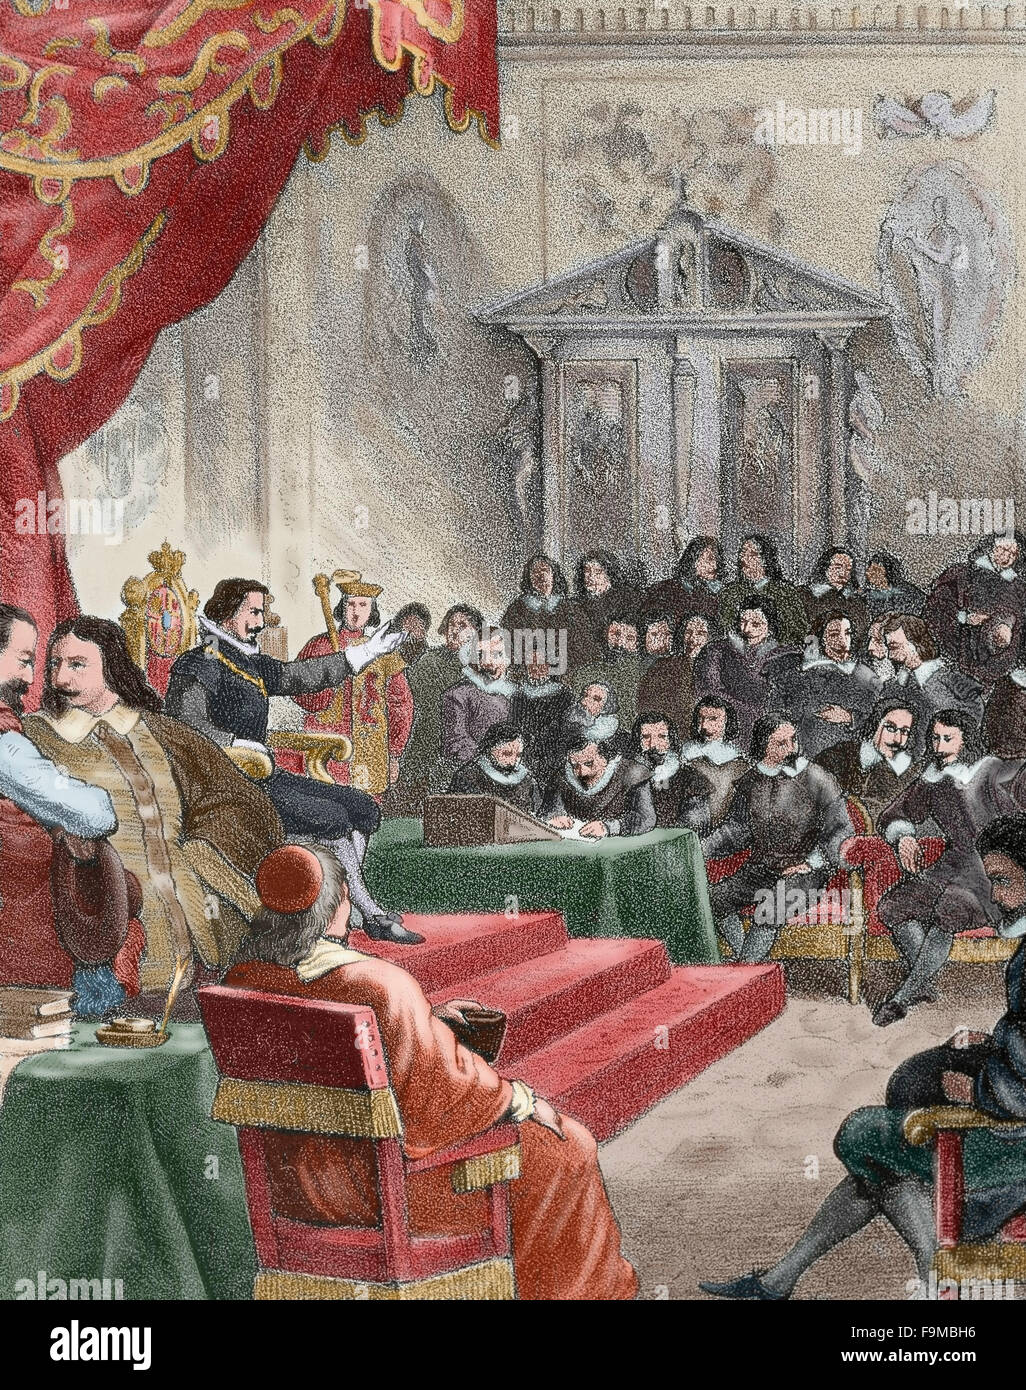 History of Spain. Castilian Courts held in 1636 under the monarchy of Philip IV (1605-1665). Engraving in 'Historia de España'. 19th century. Colored. Stock Photo